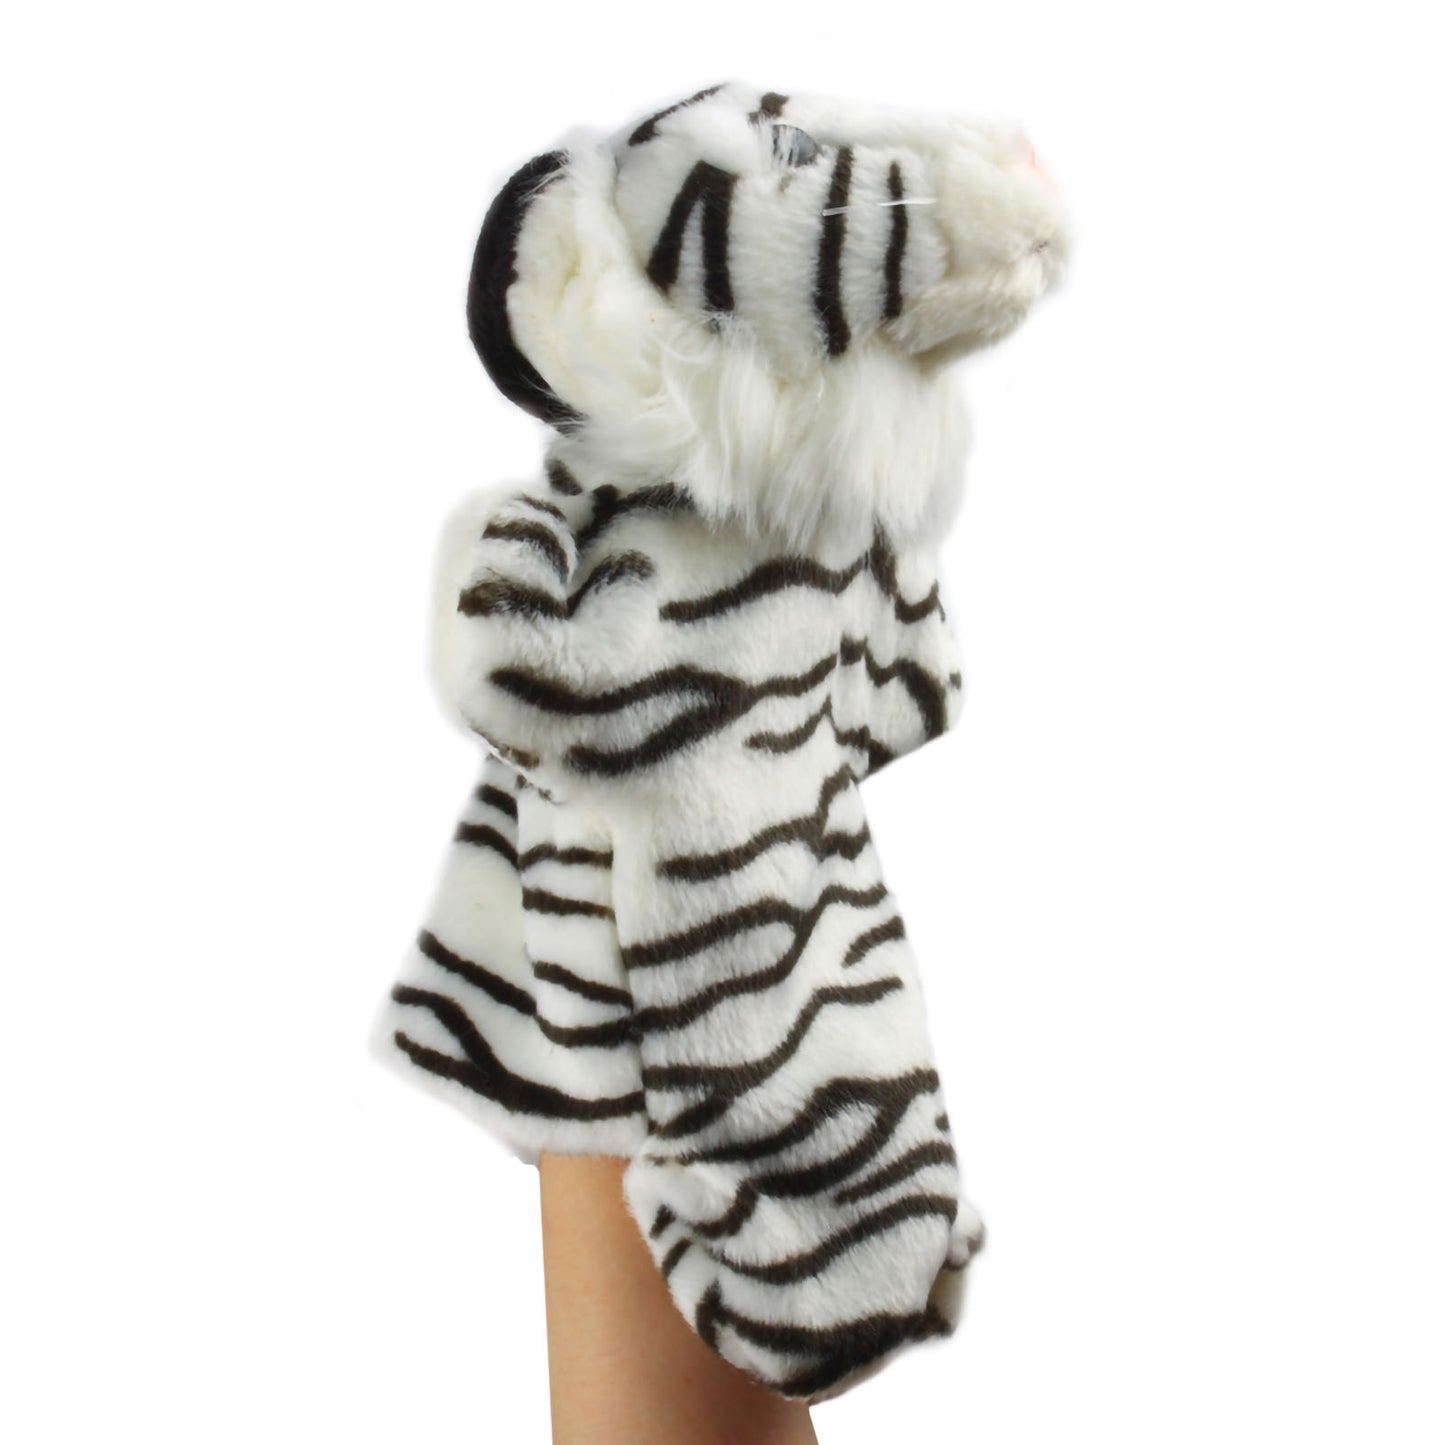 Andux Hand Puppet Soft Stuffed Animal Toy (SO-22 Tiger-Black and White Stripes)